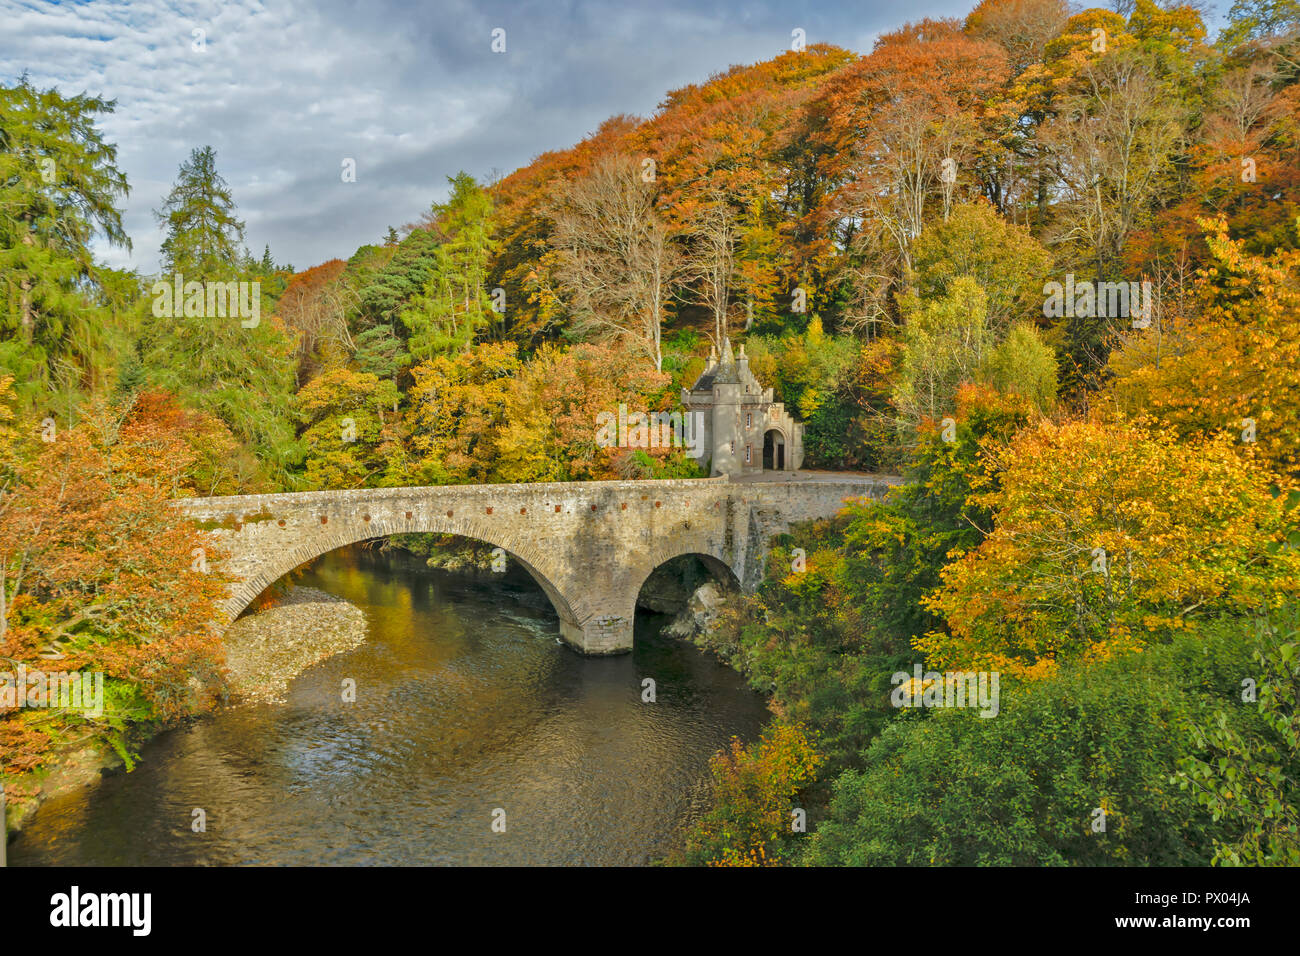 OLD BRIDGE OF AVON BALLINDALLOCH CASTLE GRAMPIAN SCOTLAND THE BRIDGE AND BARONIAL GATEHOUSE AND AUTUMNAL COLOURS IN THE RIVER Stock Photo